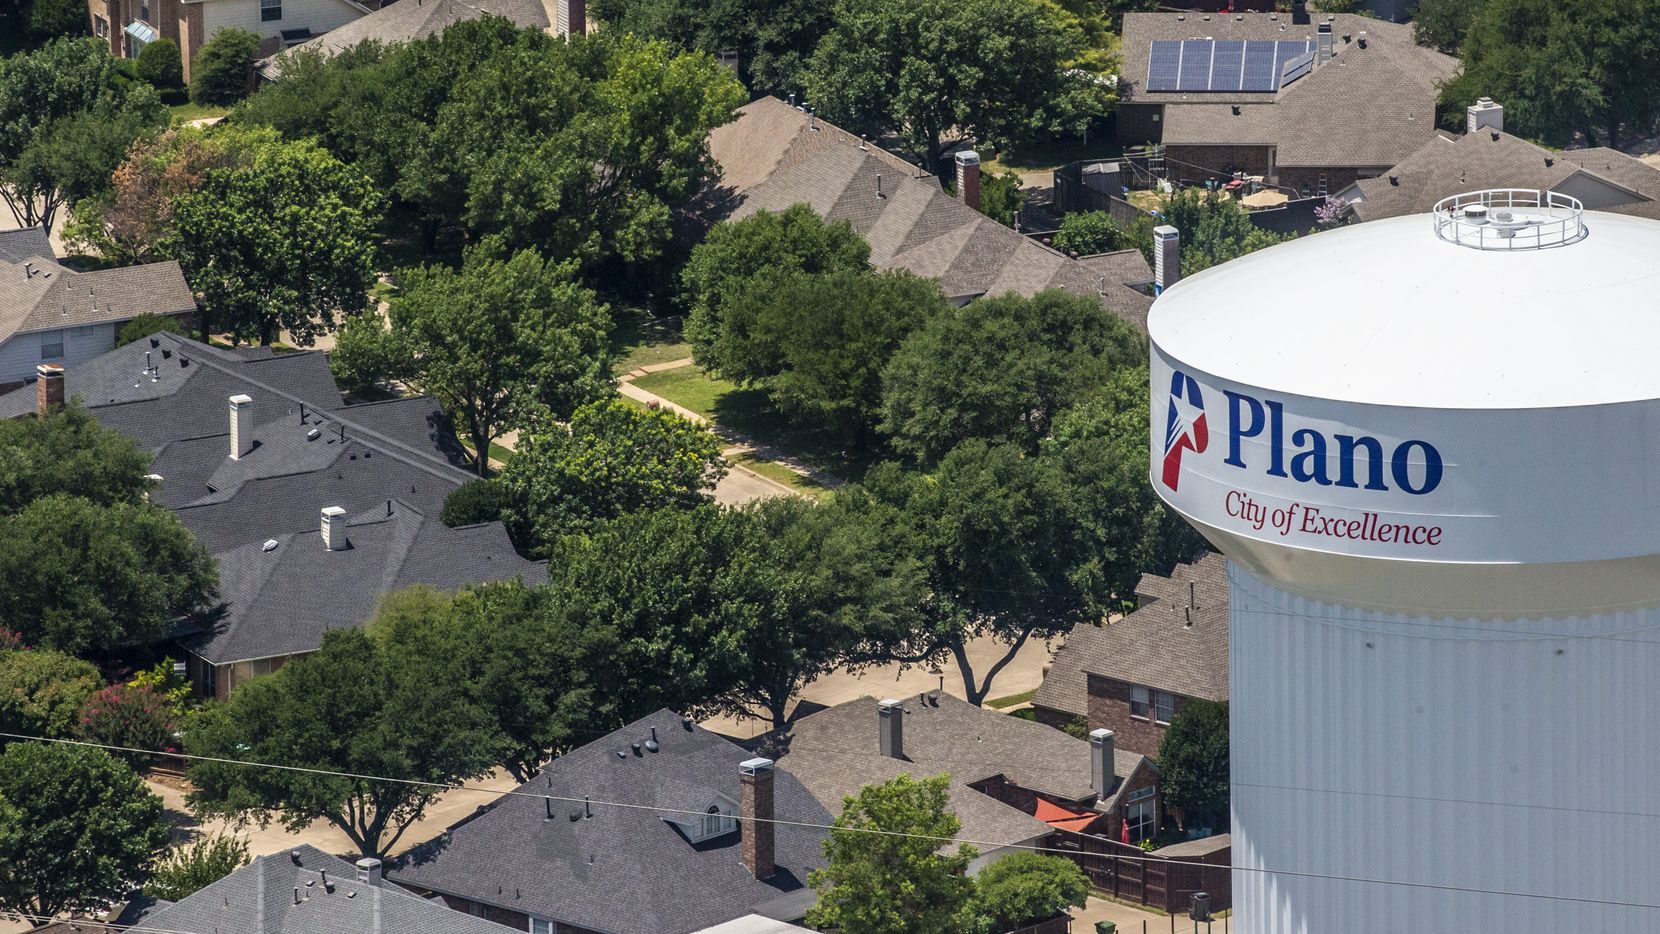 A Plano water tower in Plano, Texas, on Thursday, June 18, 2020. (Lynda M. Gonzalez/The Dallas Morning News)